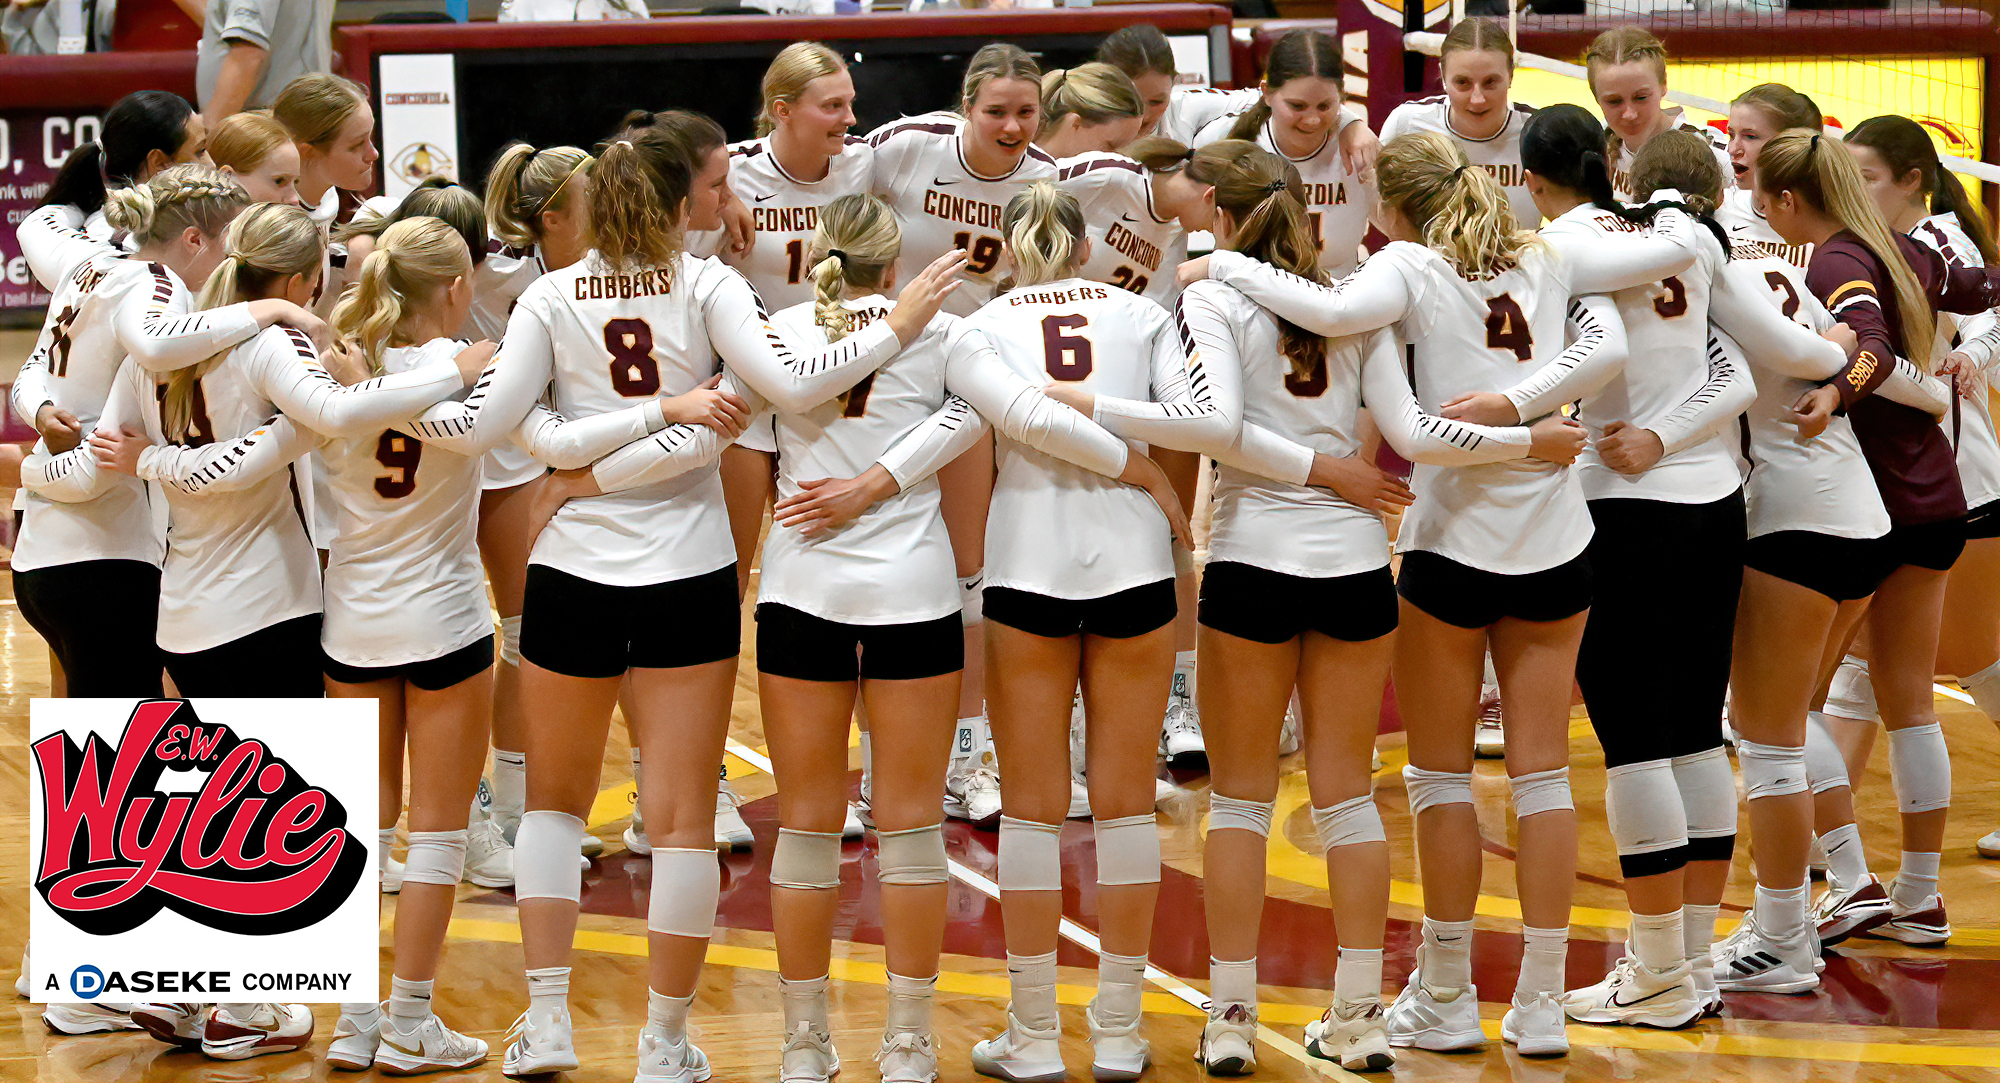 Concordia was swept (25-17, 30-28, 25-20) in Duluth by St. Scholastica.